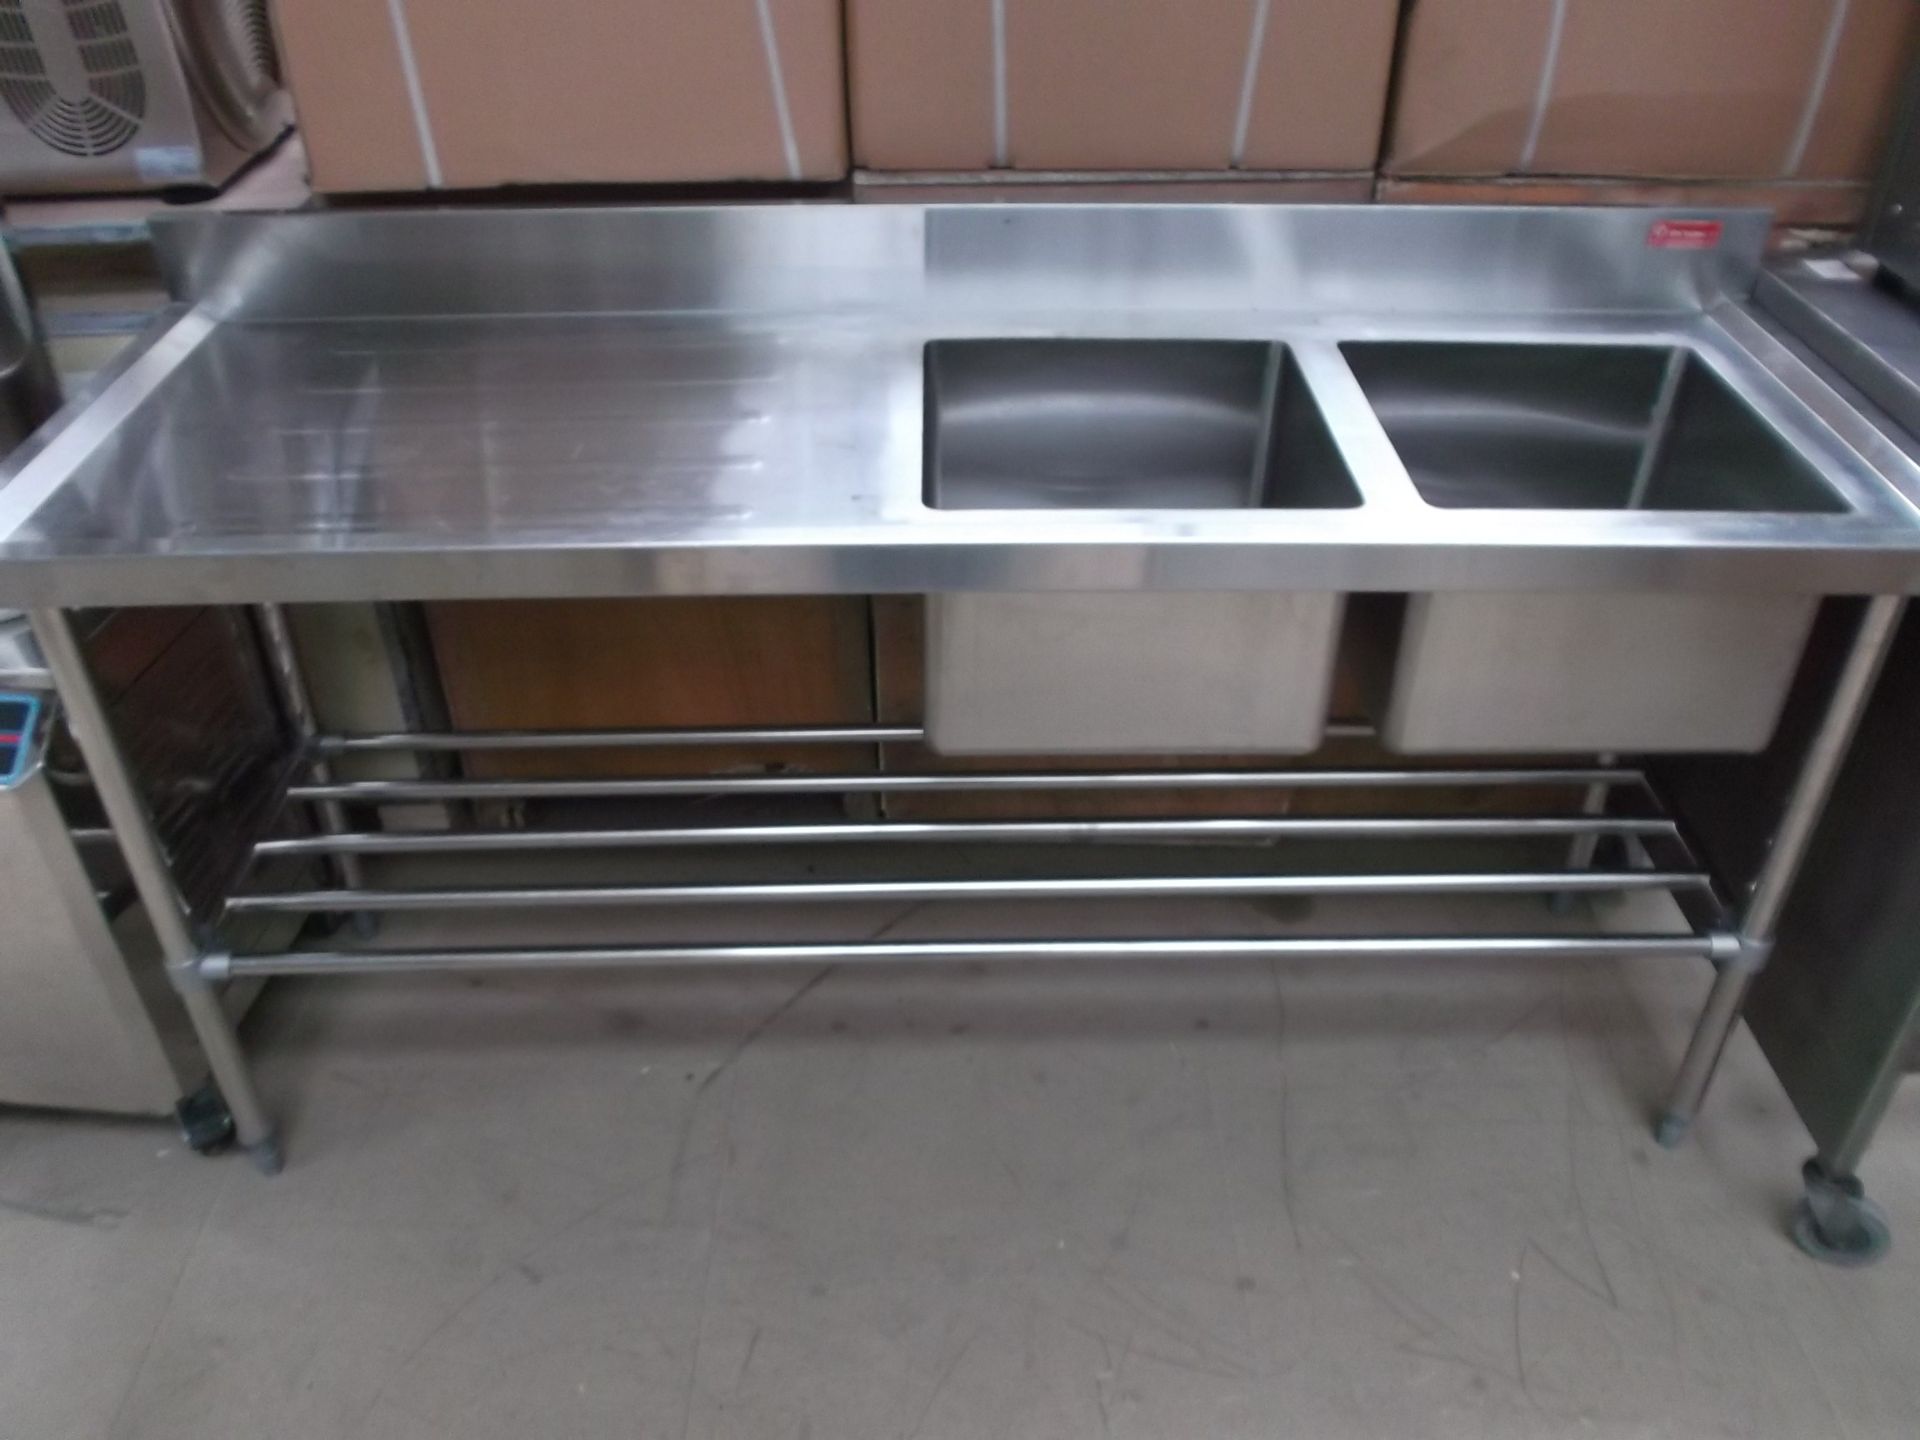 New Stainless Steel Double Bowl Sink Unit LHD

1500 mm long

Adjustable Feet.

Boxed